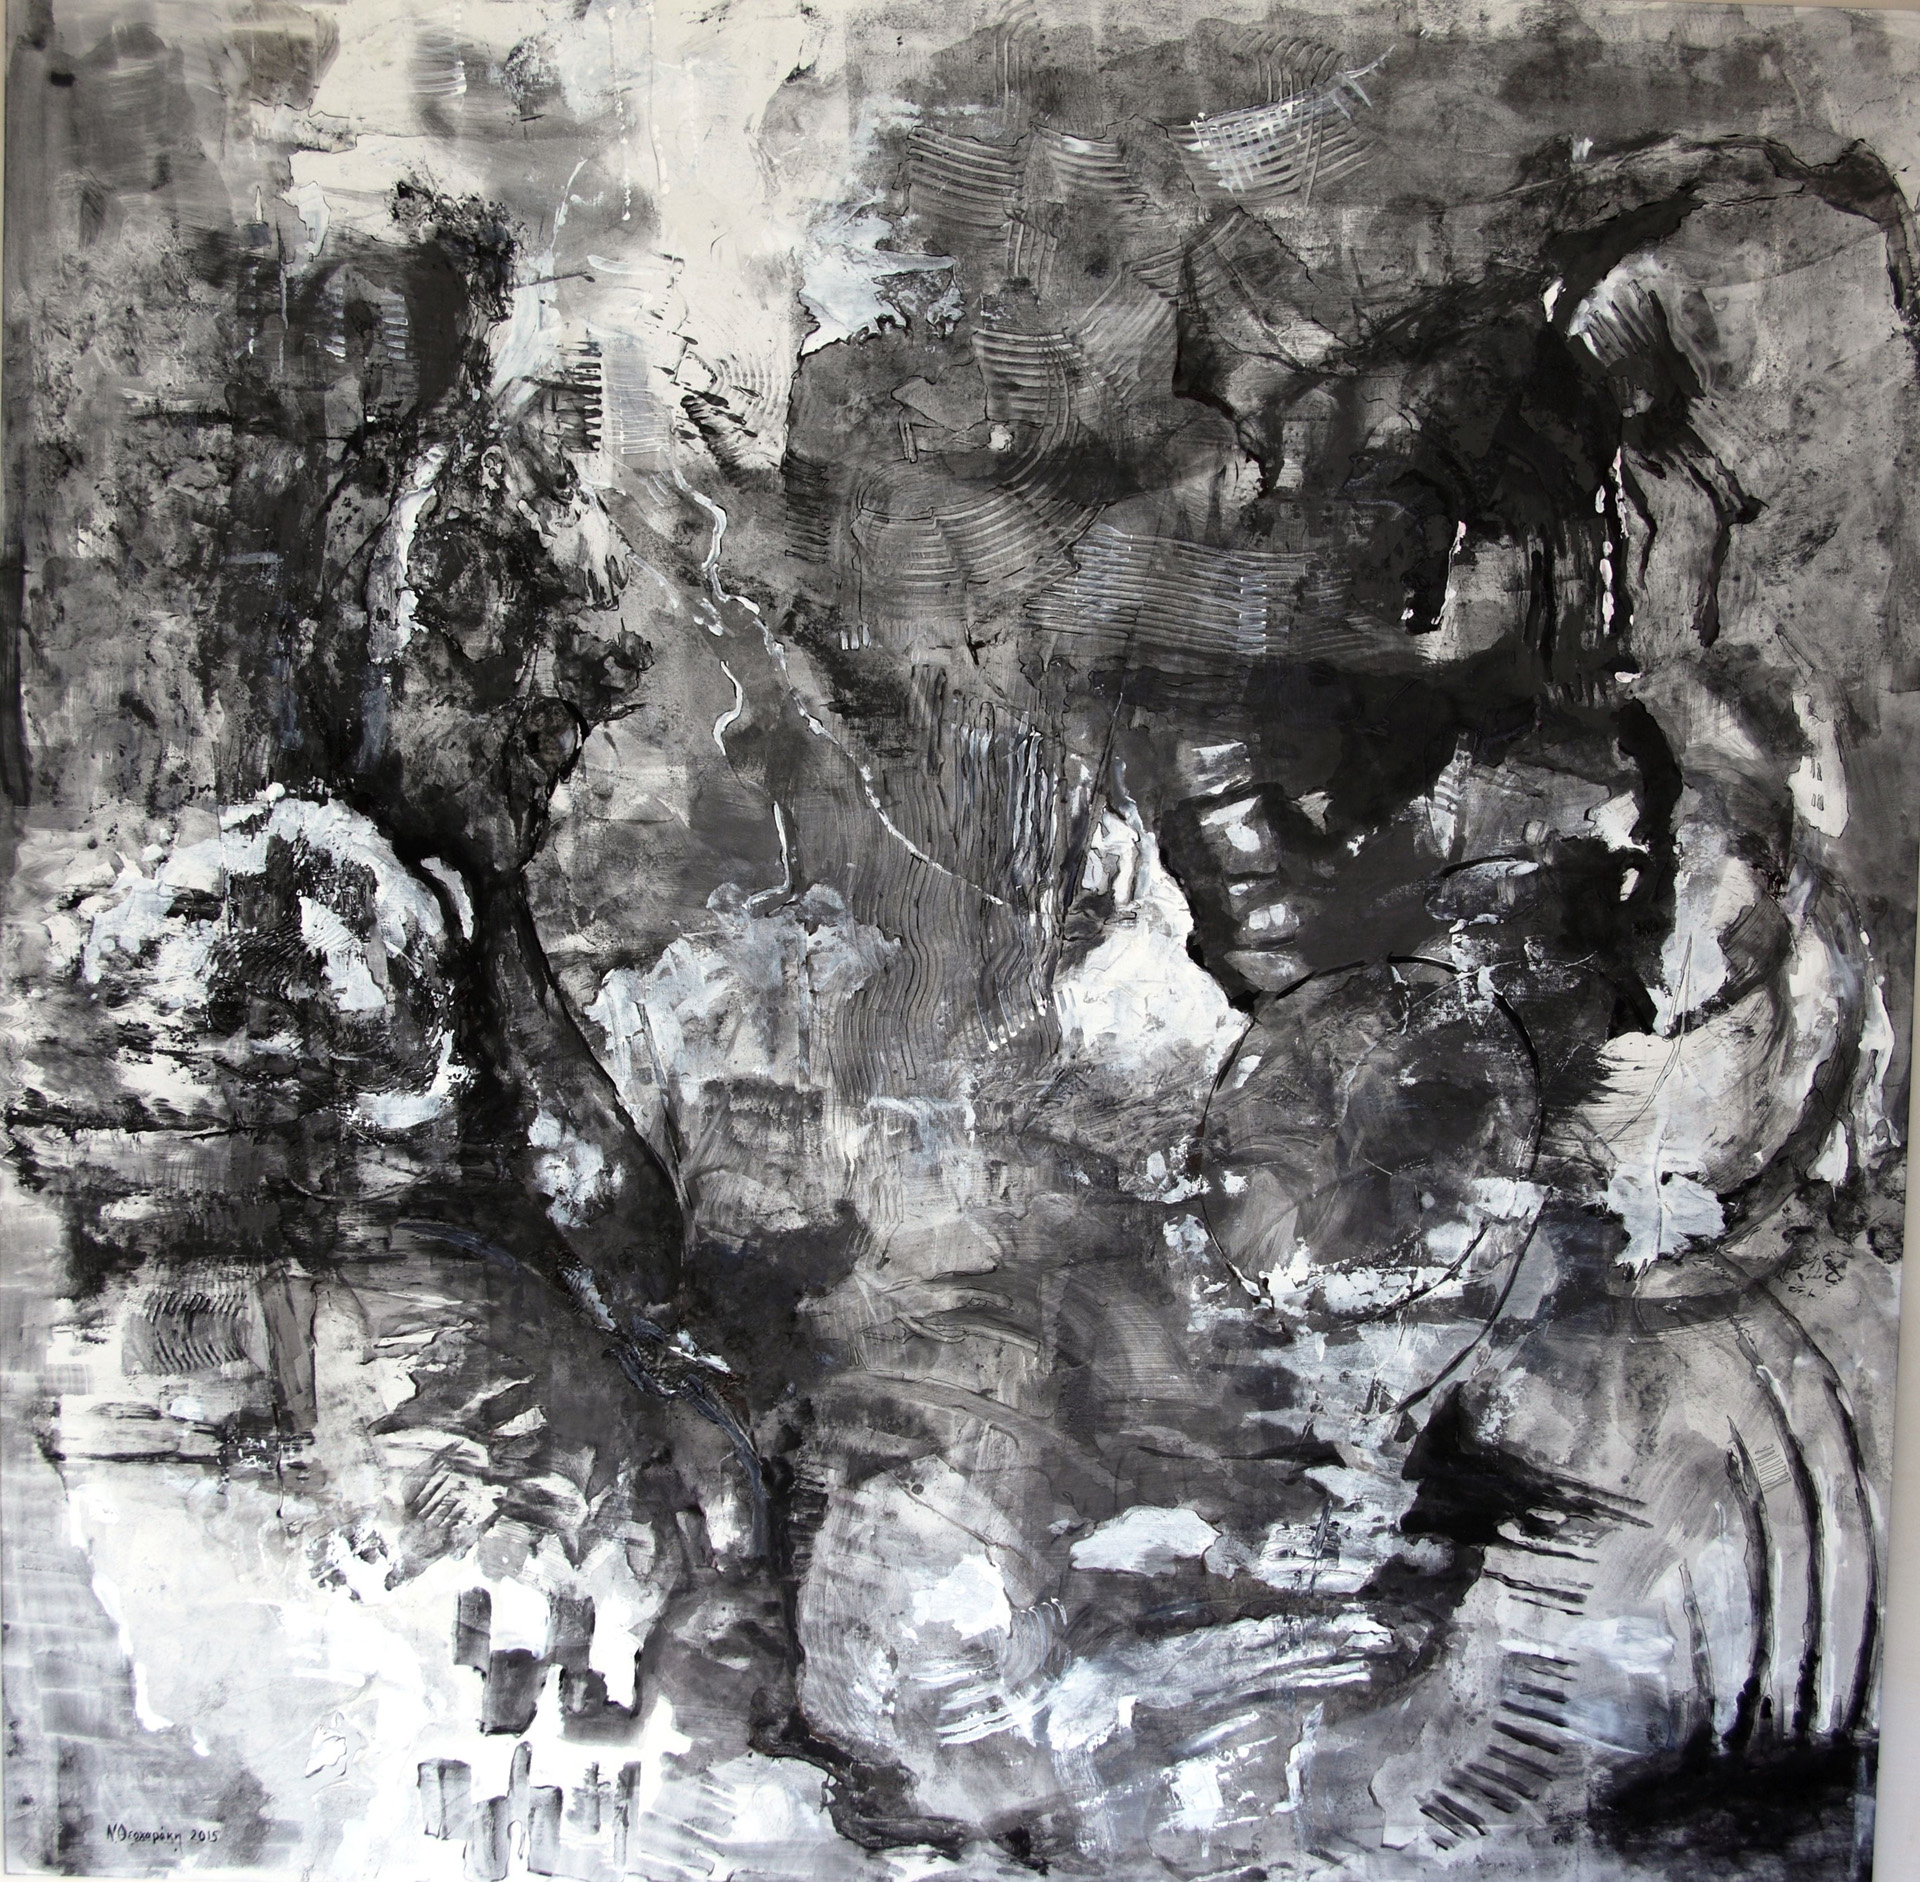 Ink and acrylics on canvas | Private Collection | 160 x 160 cm (63 x 63 inches)